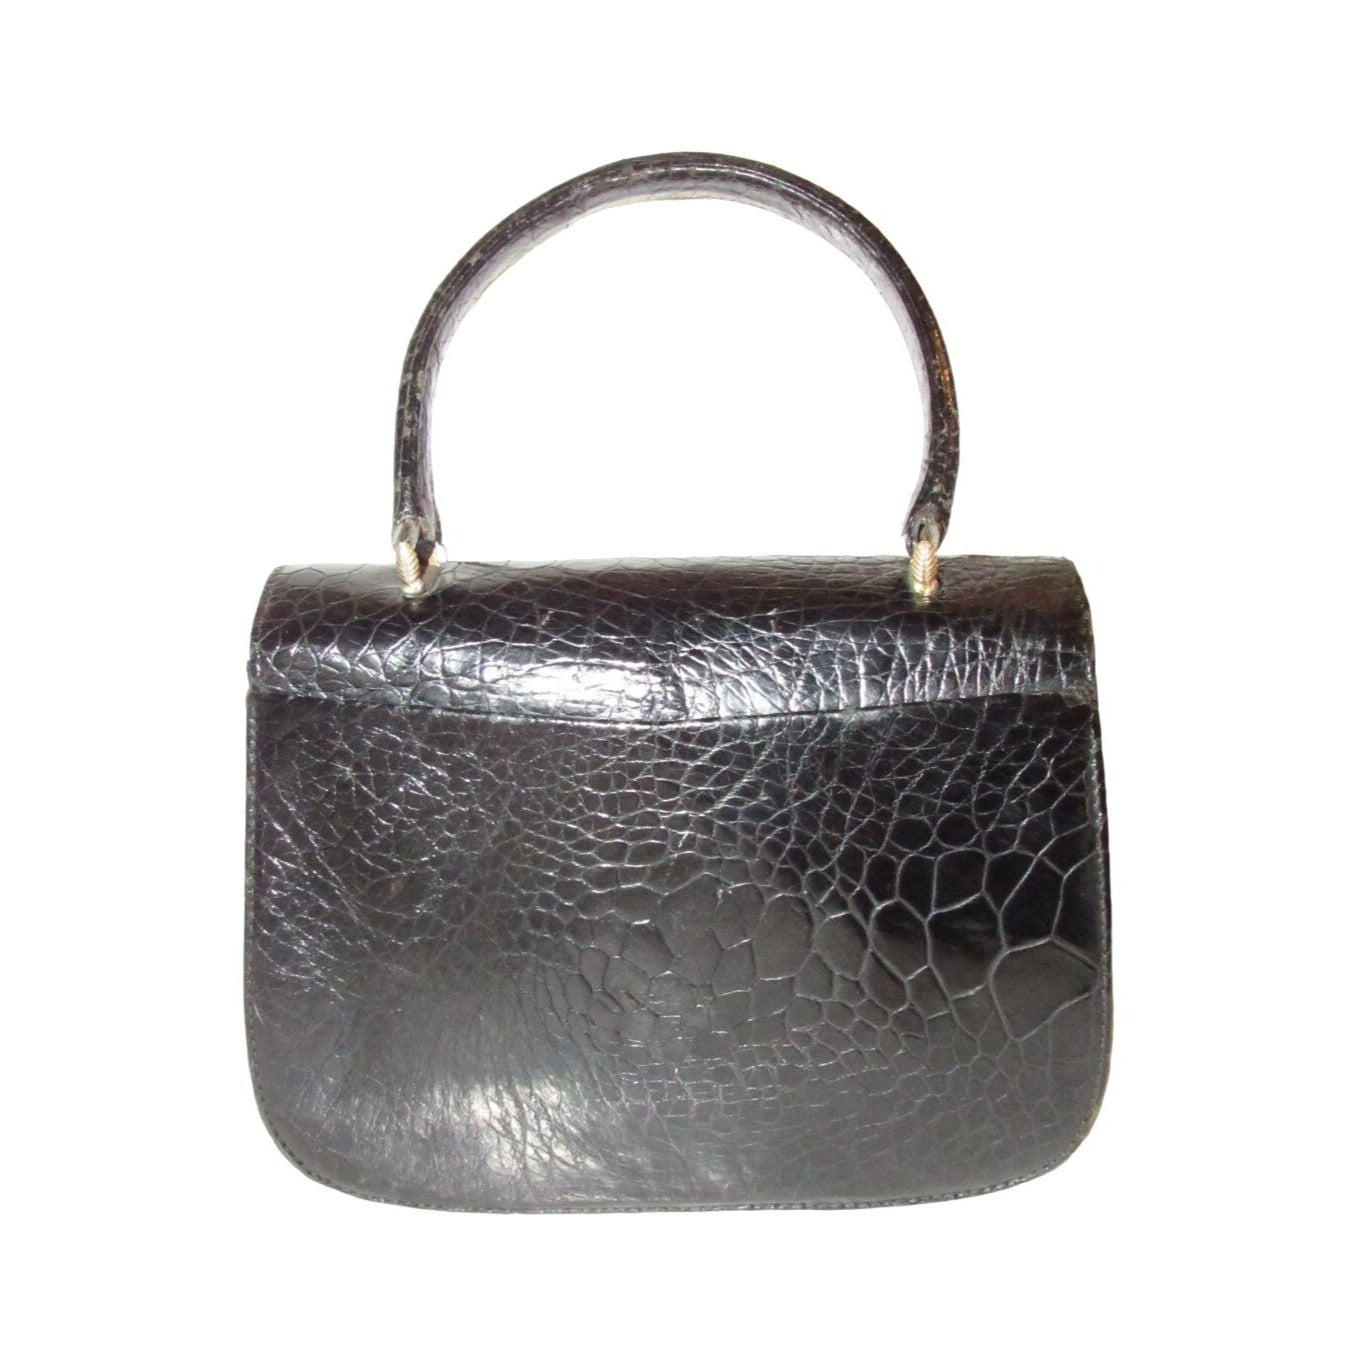 Giorgio GUCCI, Bamboo 1947 style, dark navy crocodile leather, top handle purse with sterling hardware, a boxy, structured shape, & an envelope style top